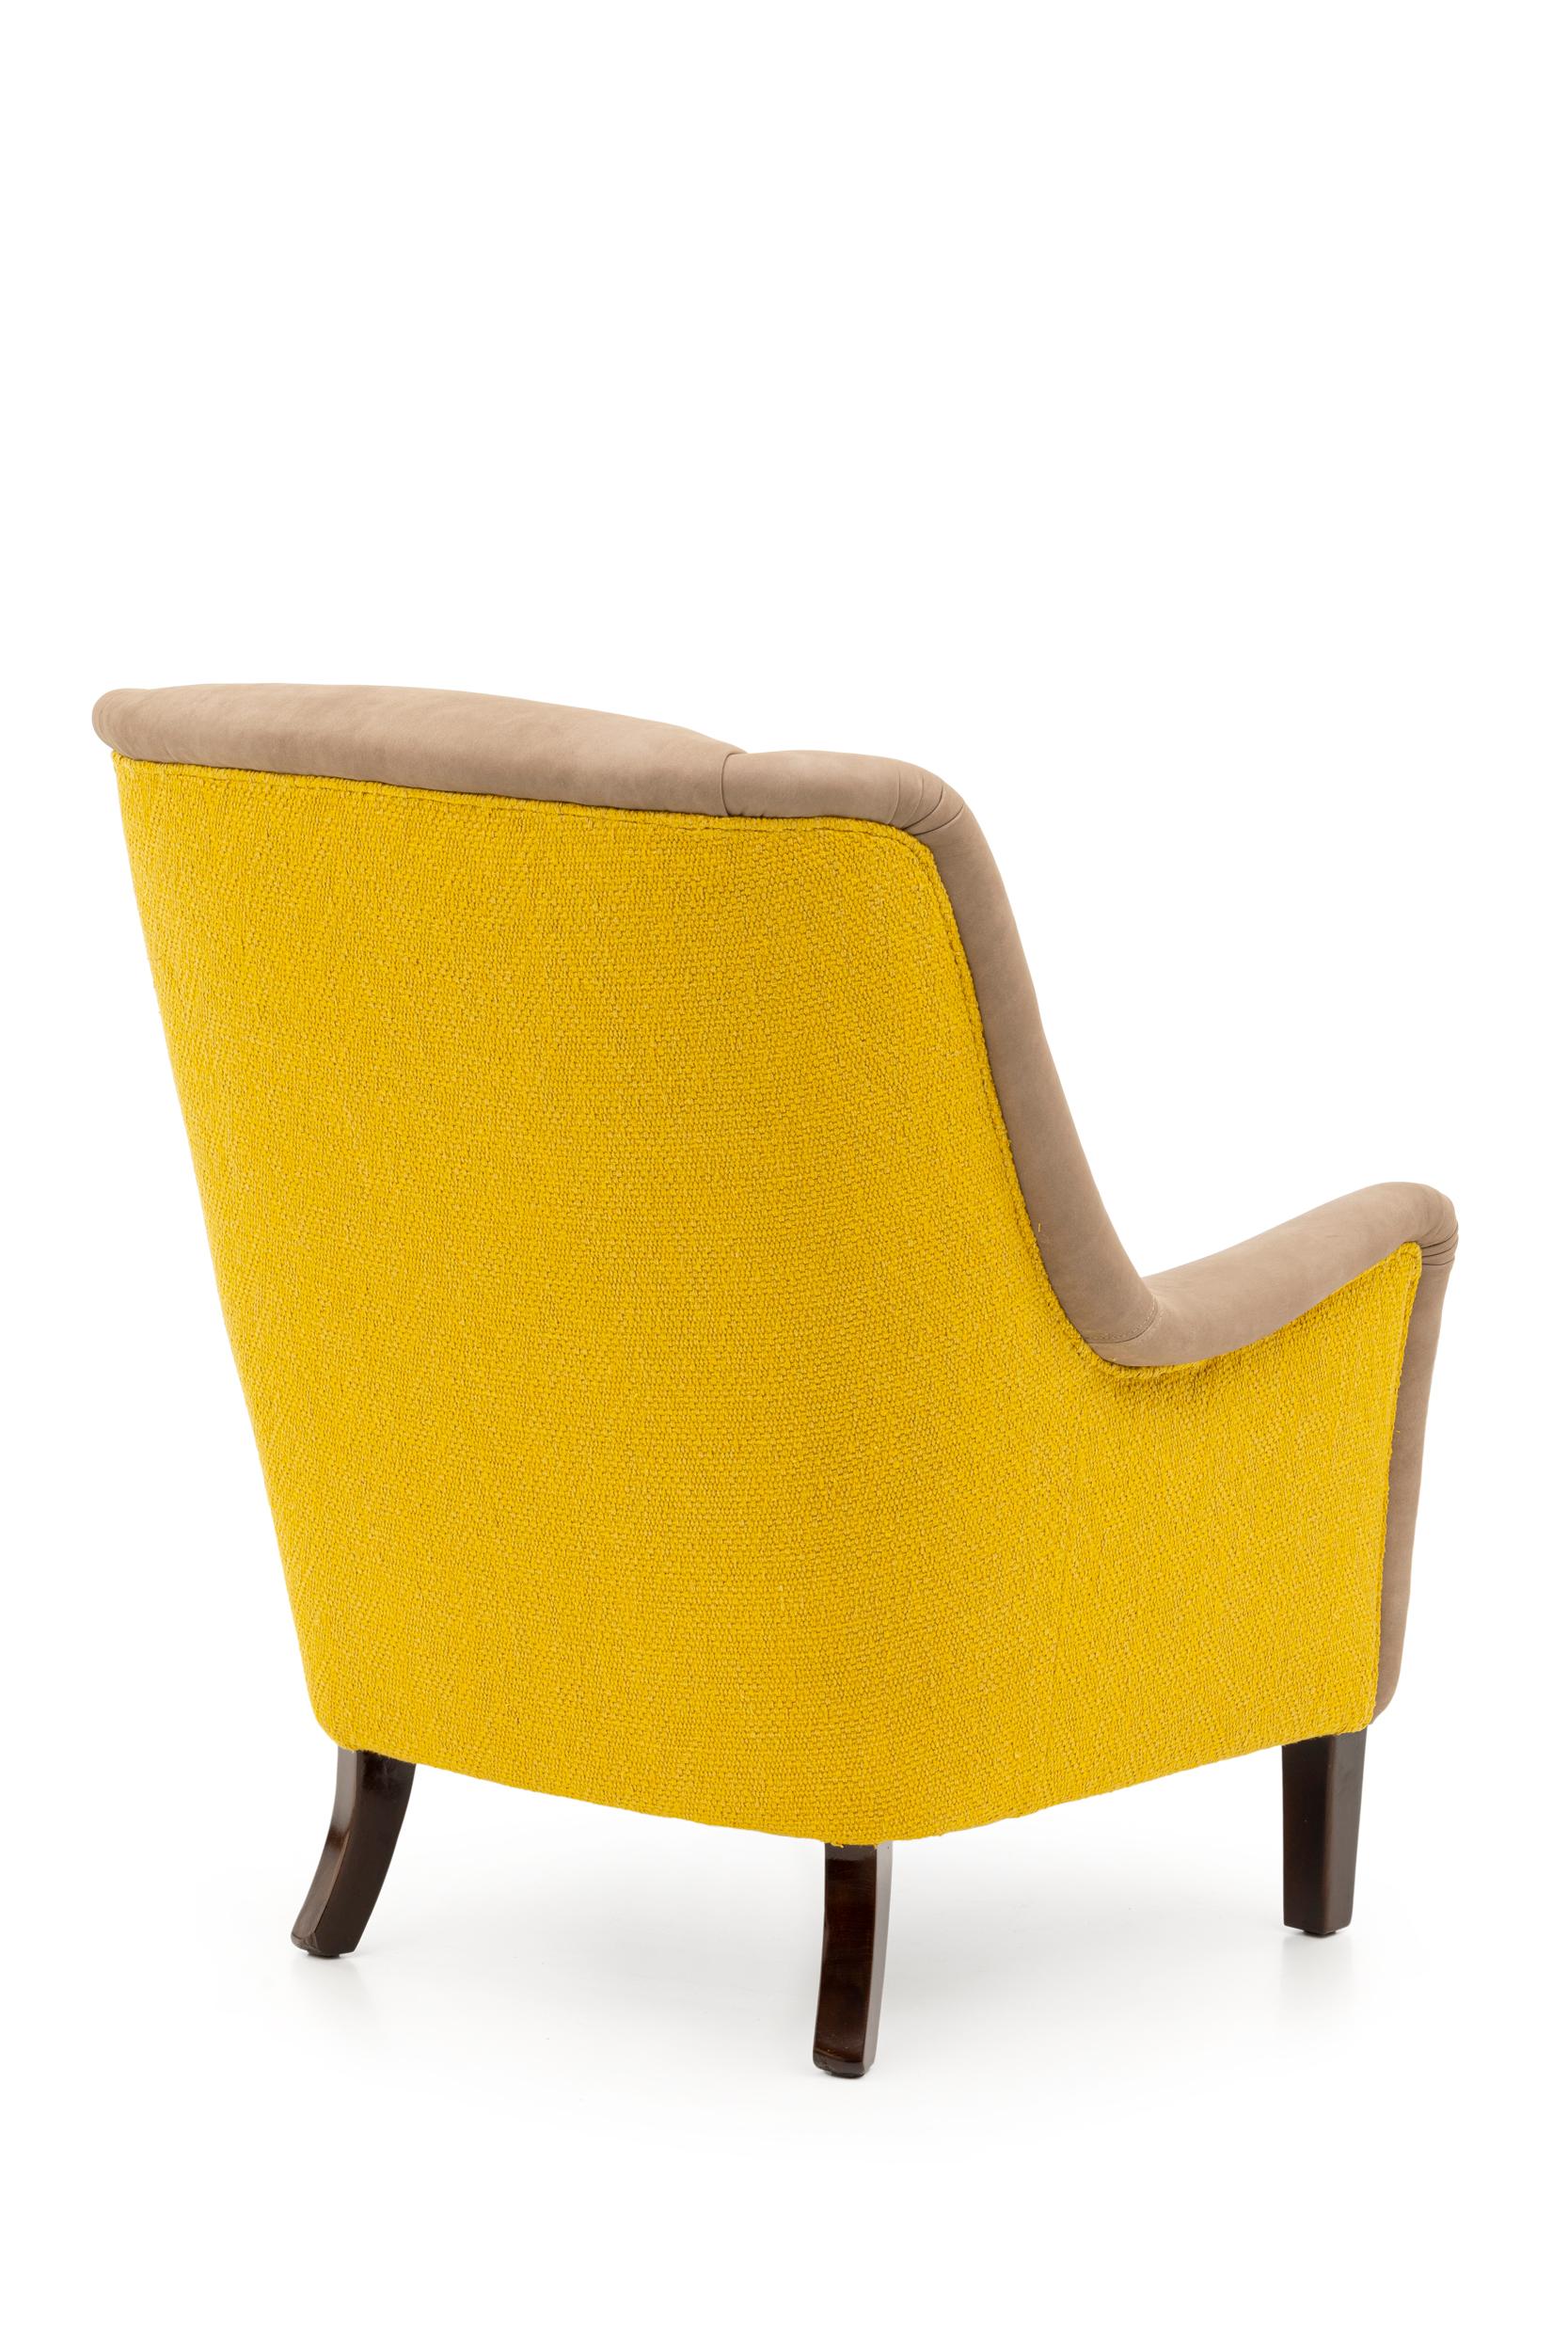 An elegant yet robust chair that strives for comfort.
Upholstered in leather and with a back covered in bright yellow fabric.

This chairis produced in Portugal by highly skilled craftsmen, which allows us to guarantee the final product quality and